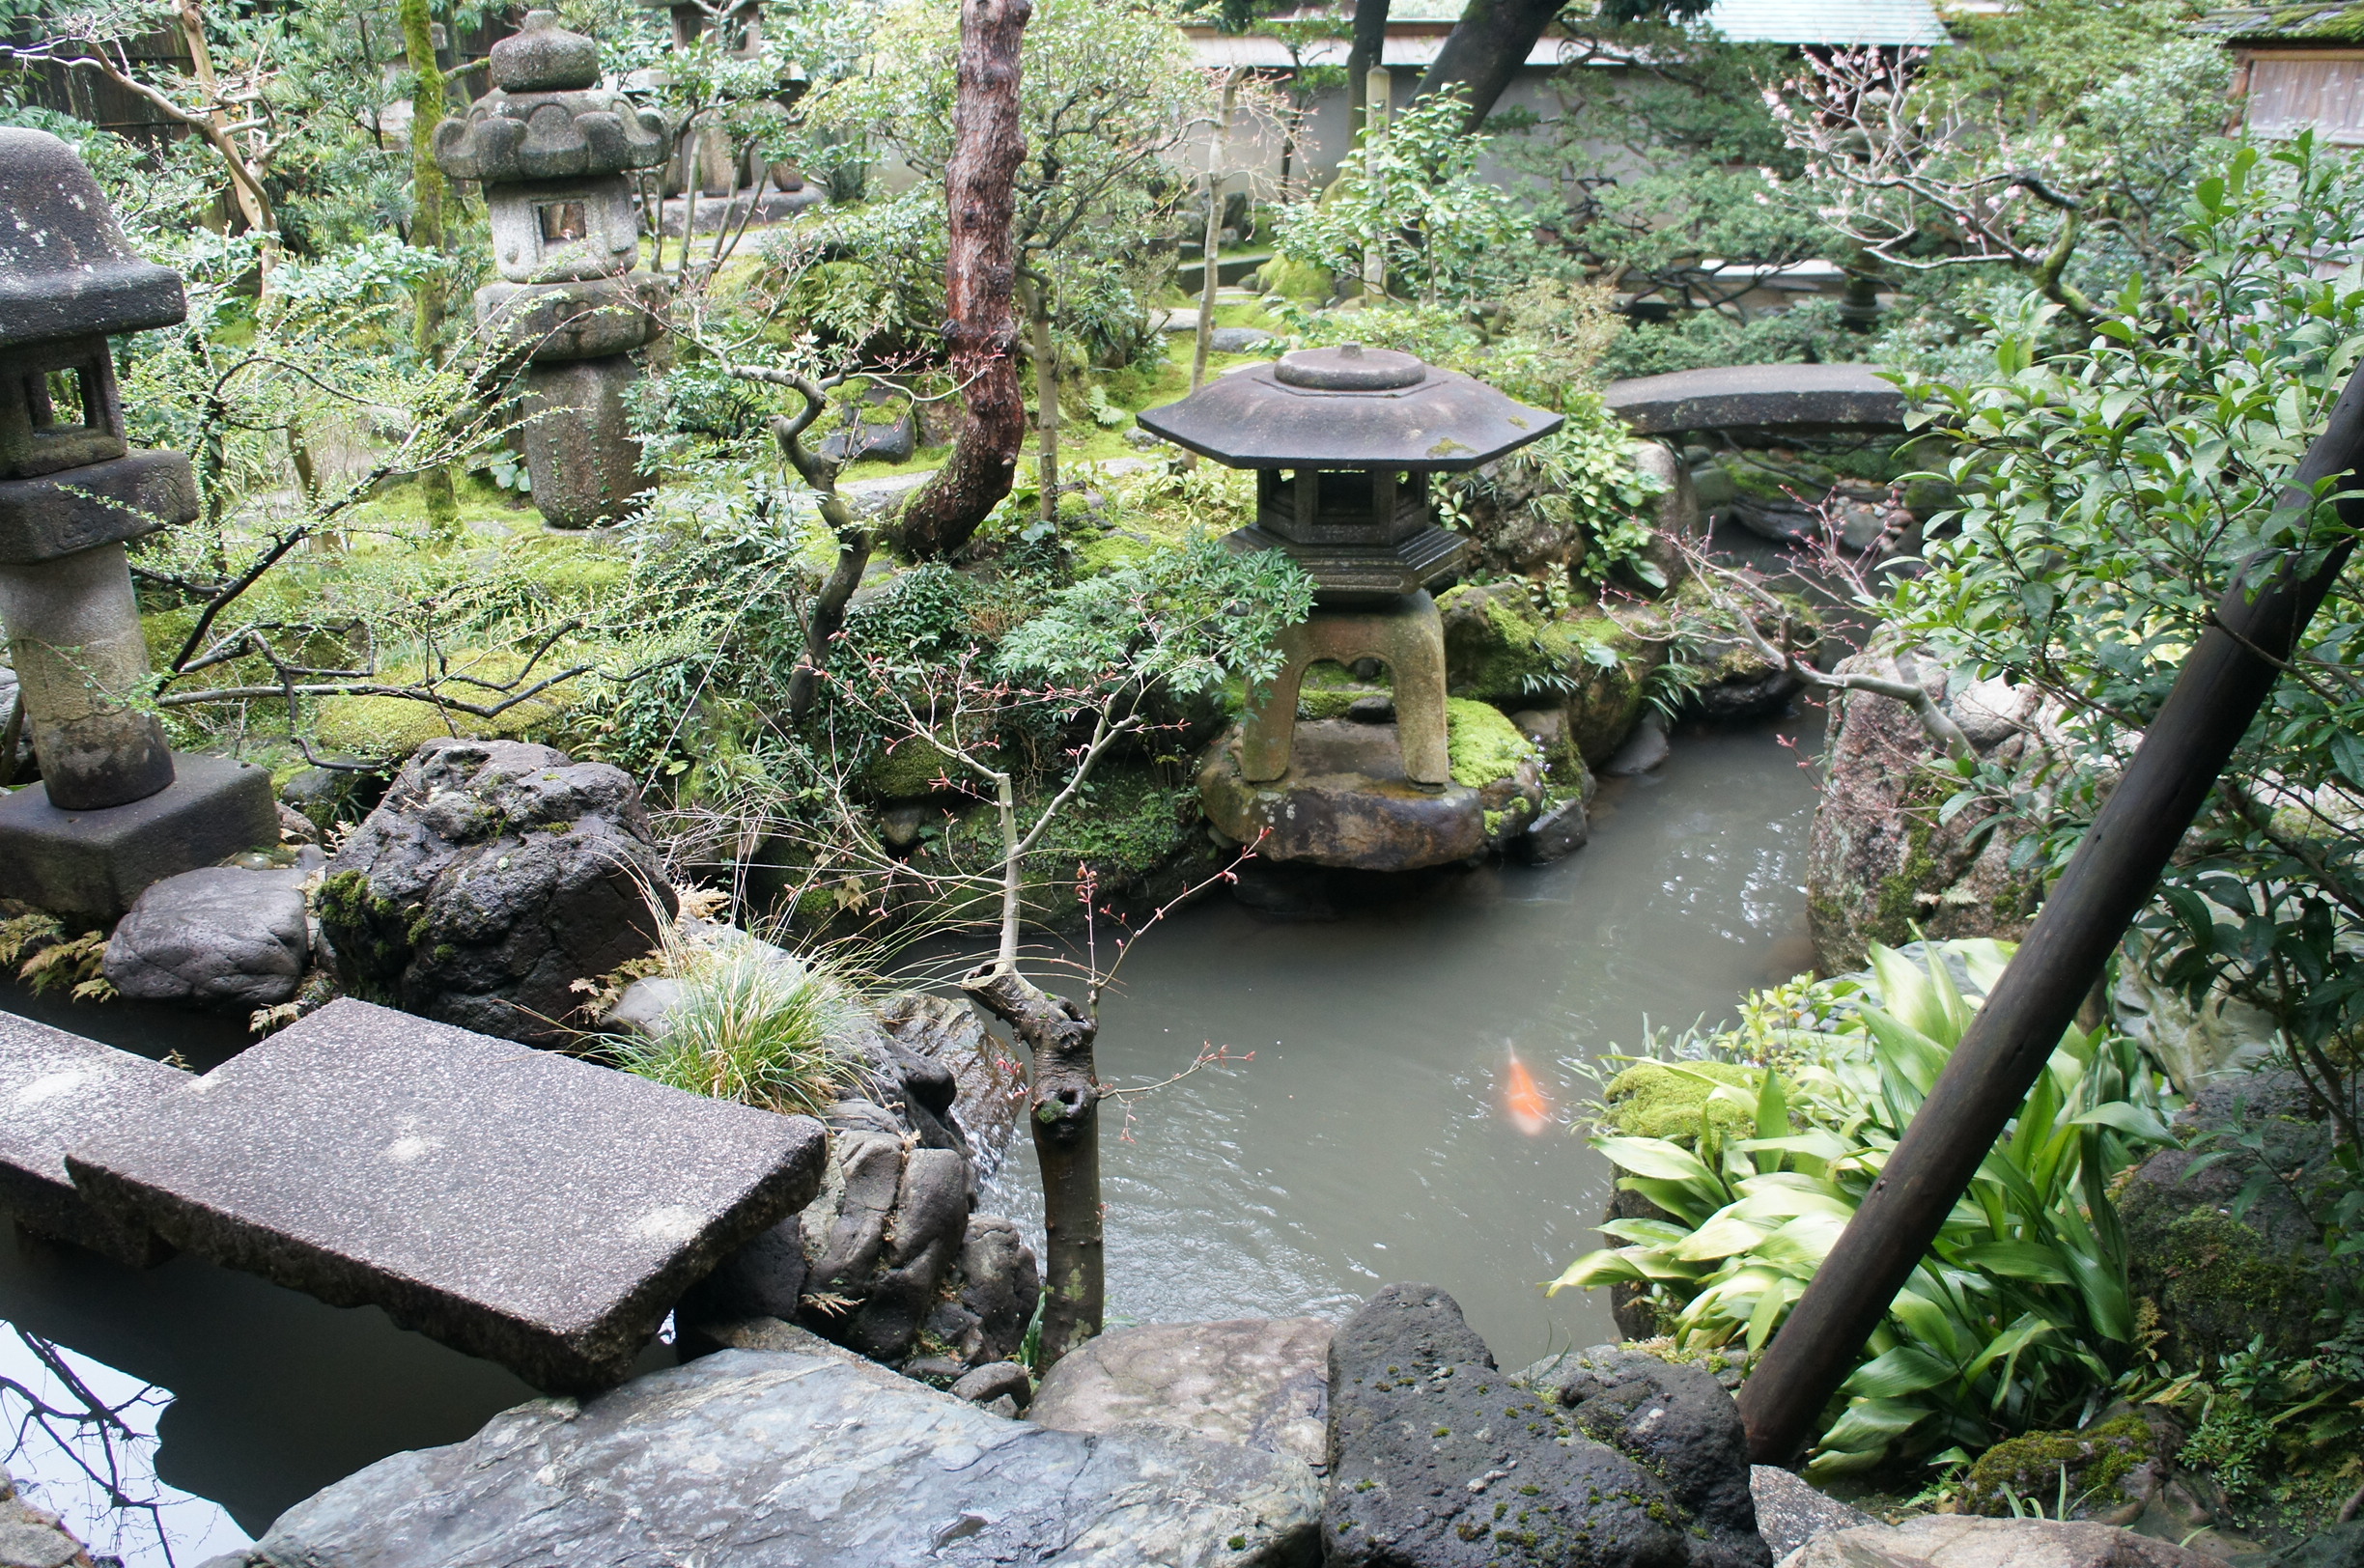 Inner garden with stone lanterns, waterfall, and a pond of colorful koi carp.